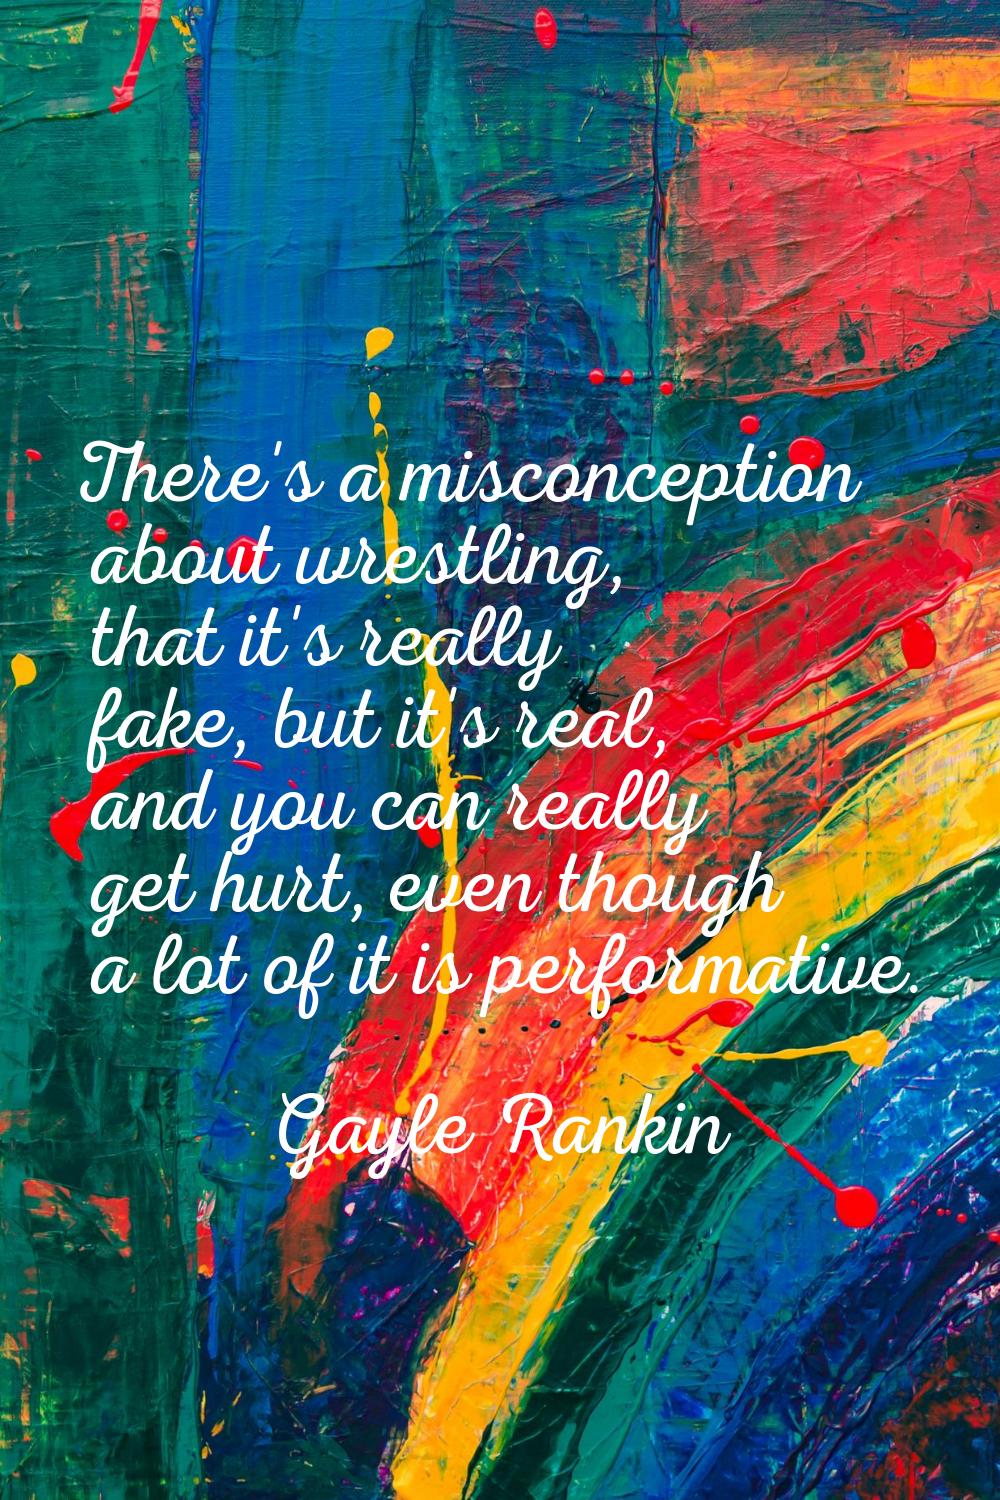 There's a misconception about wrestling, that it's really fake, but it's real, and you can really g